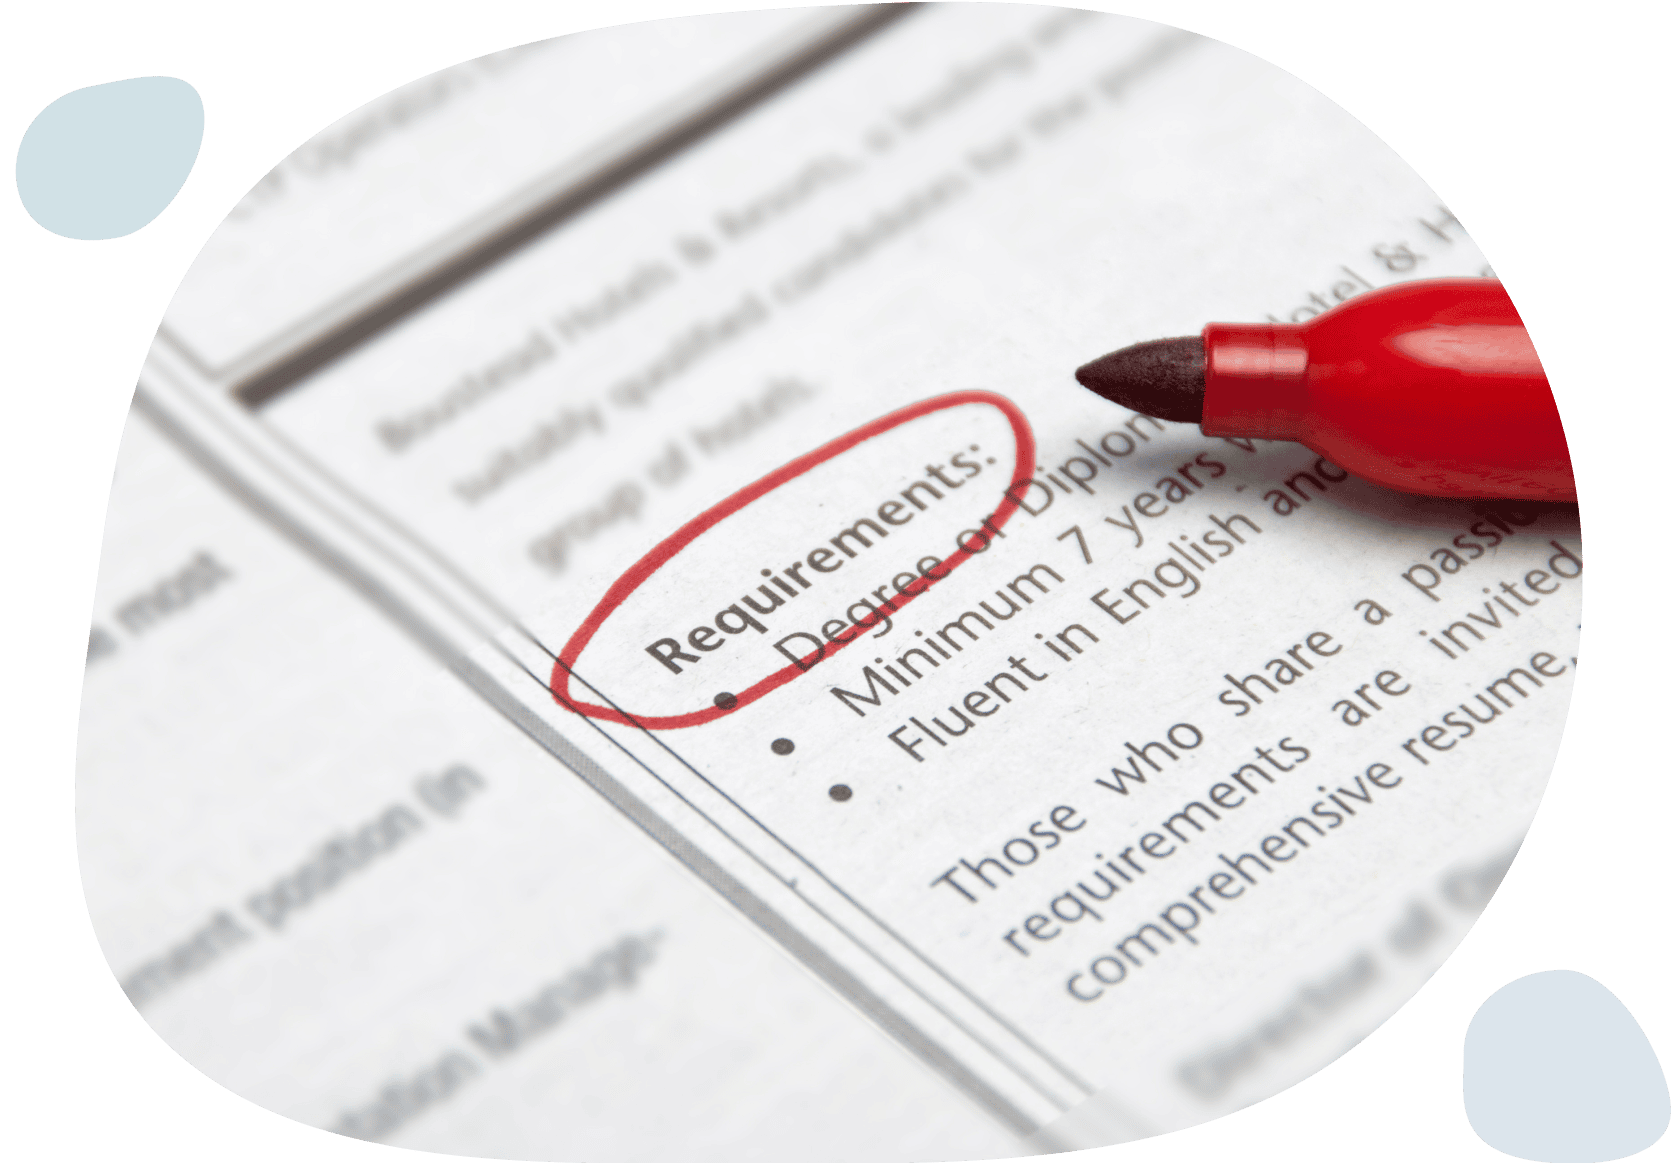 A red pen highlights a requirement on a document, emphasizing its importance.